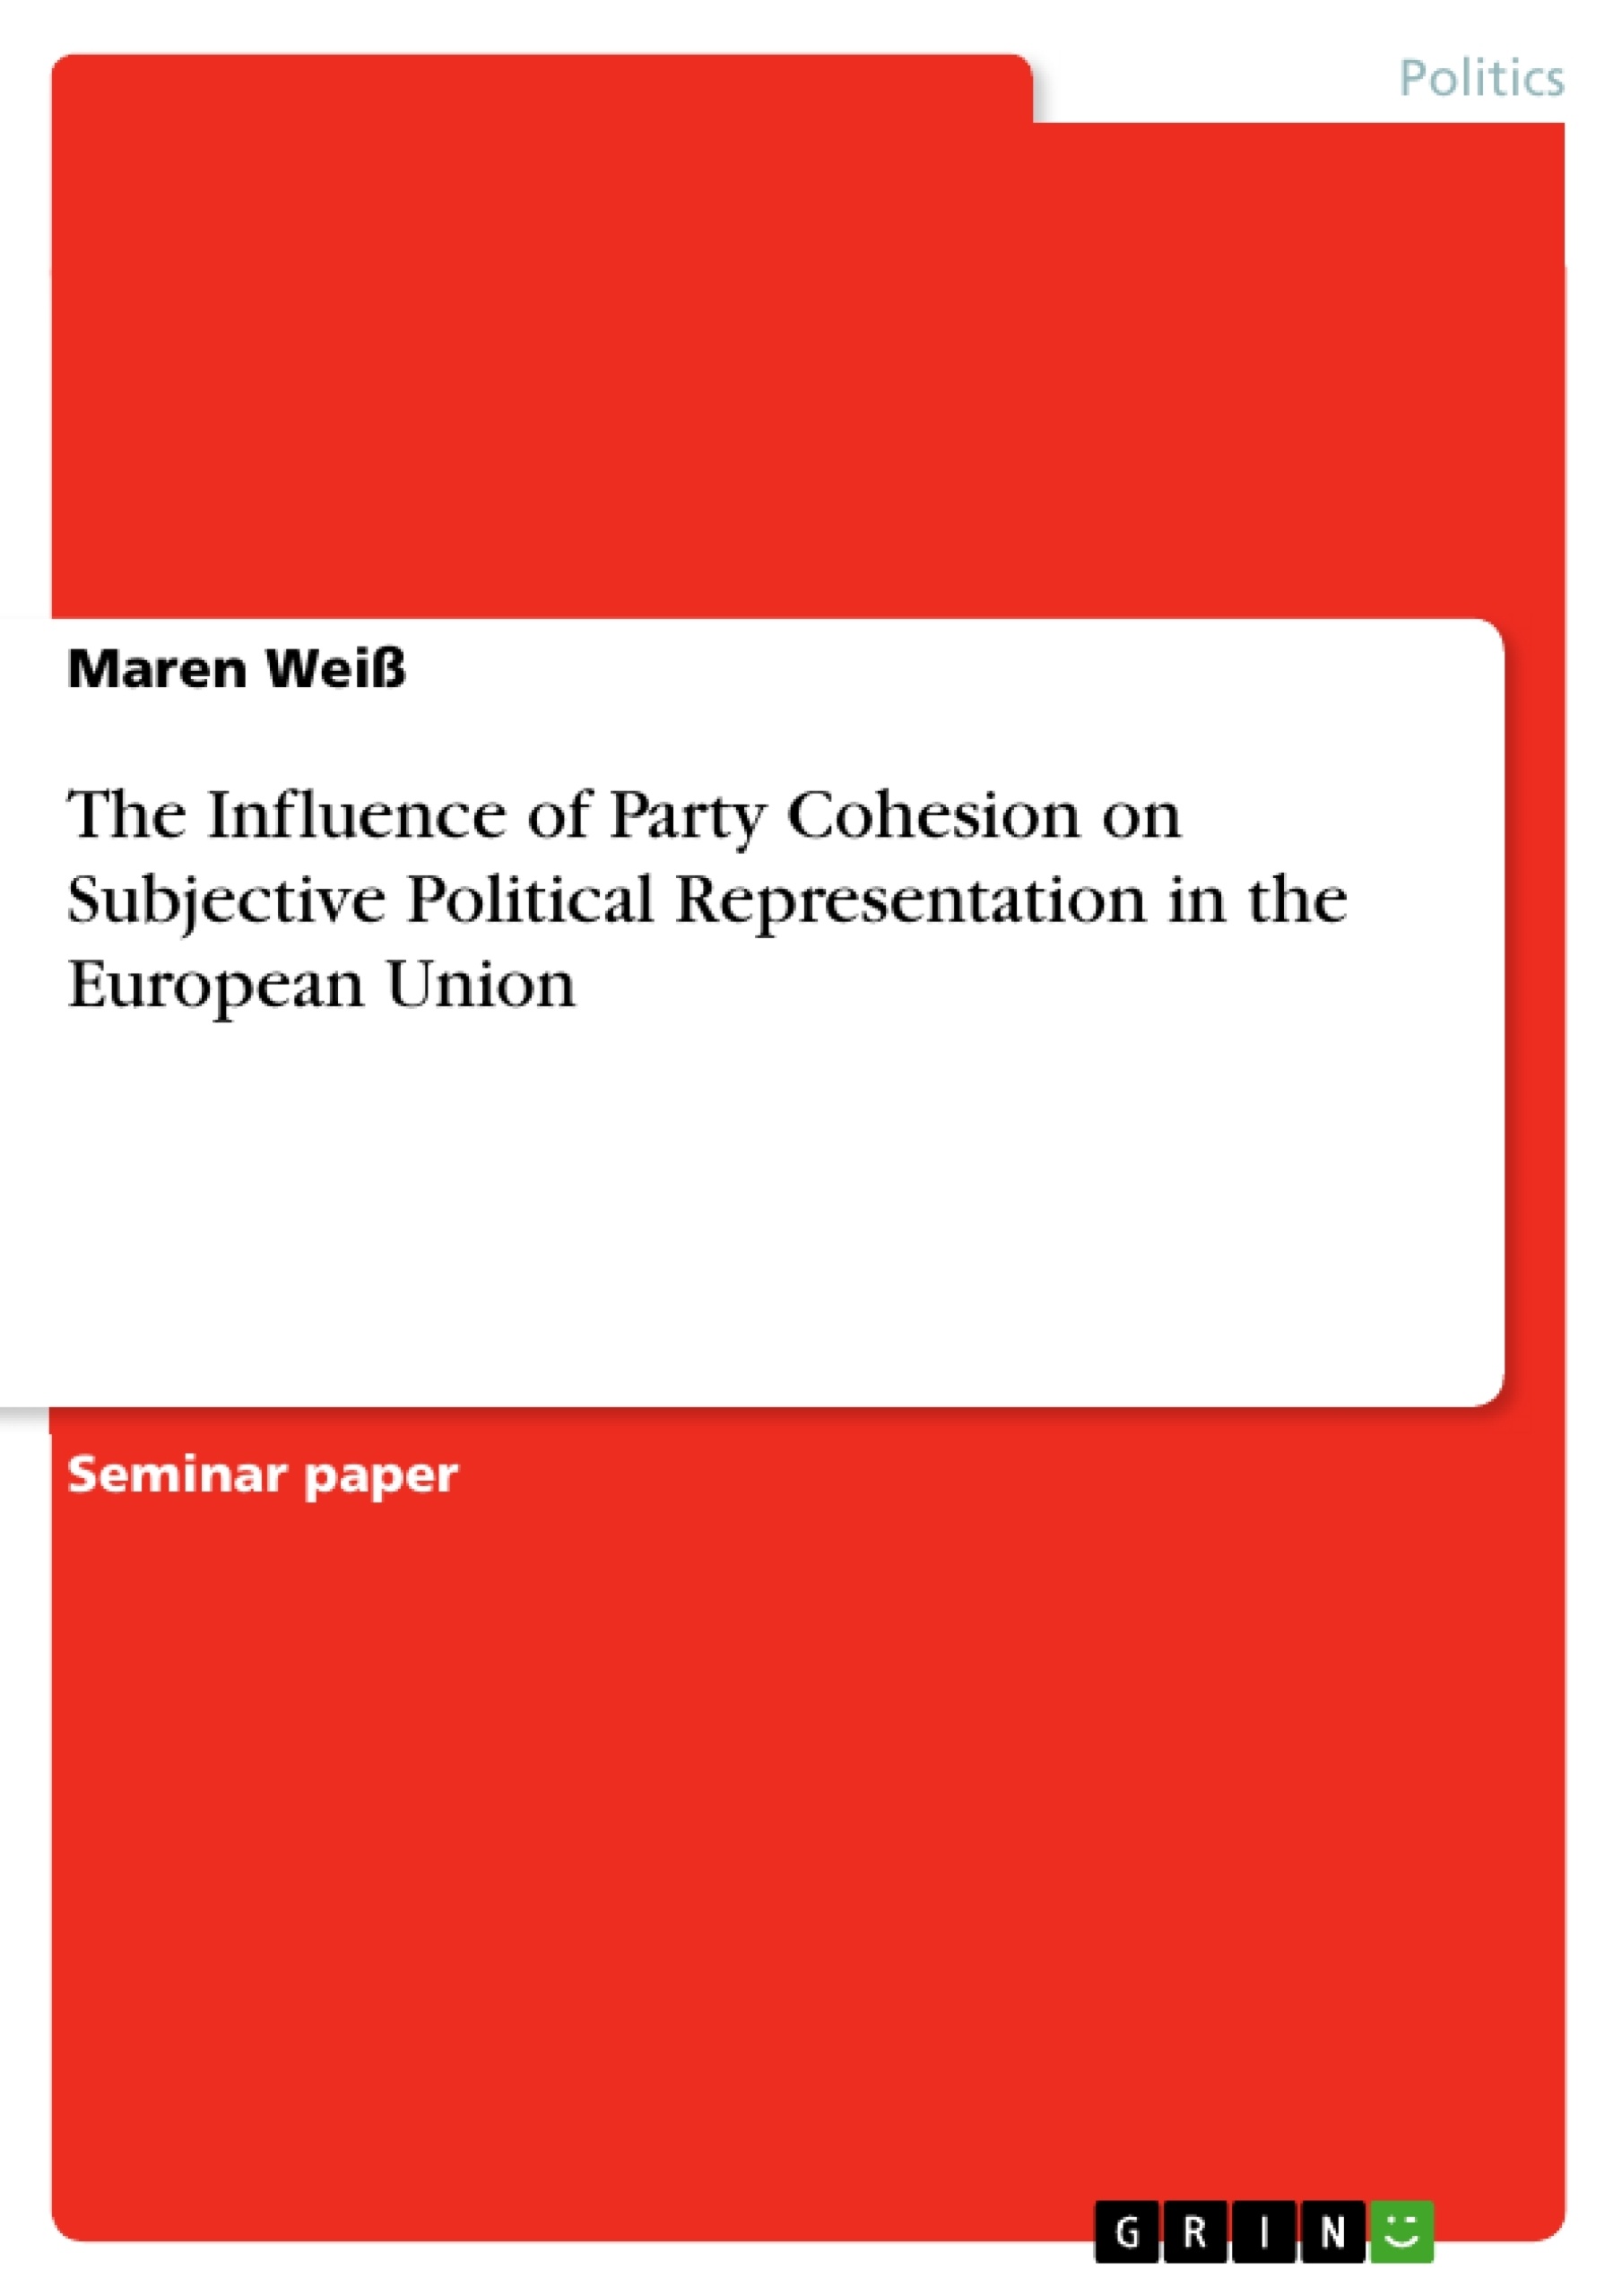 Titre: The Influence of Party Cohesion on Subjective Political Representation in the European Union